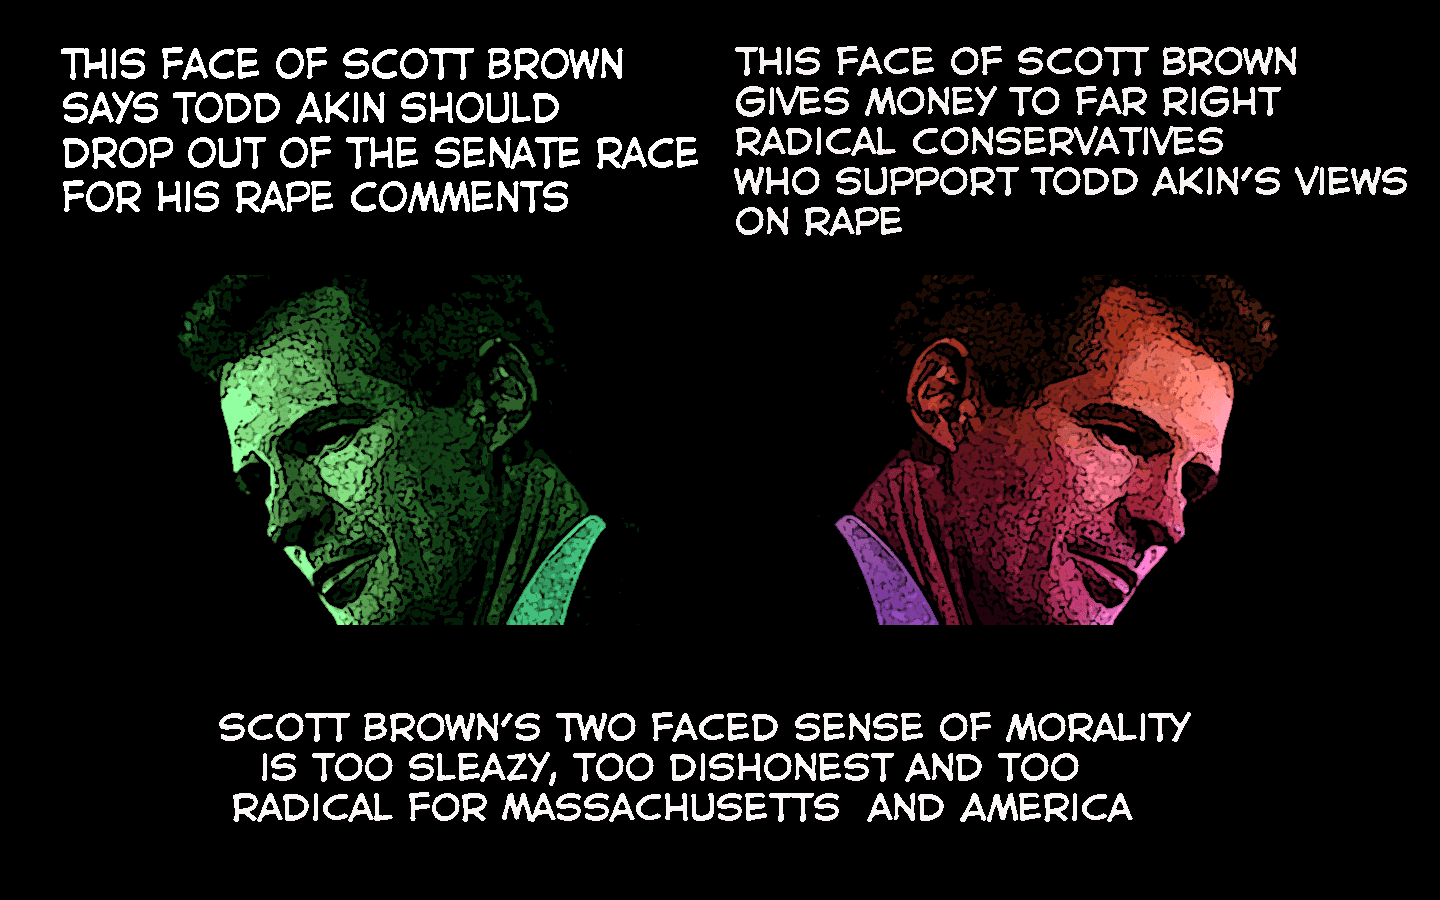 Scott+Brown+is+too+sleazy+and+too+dishonest+for+Massachusetts+and+America.png